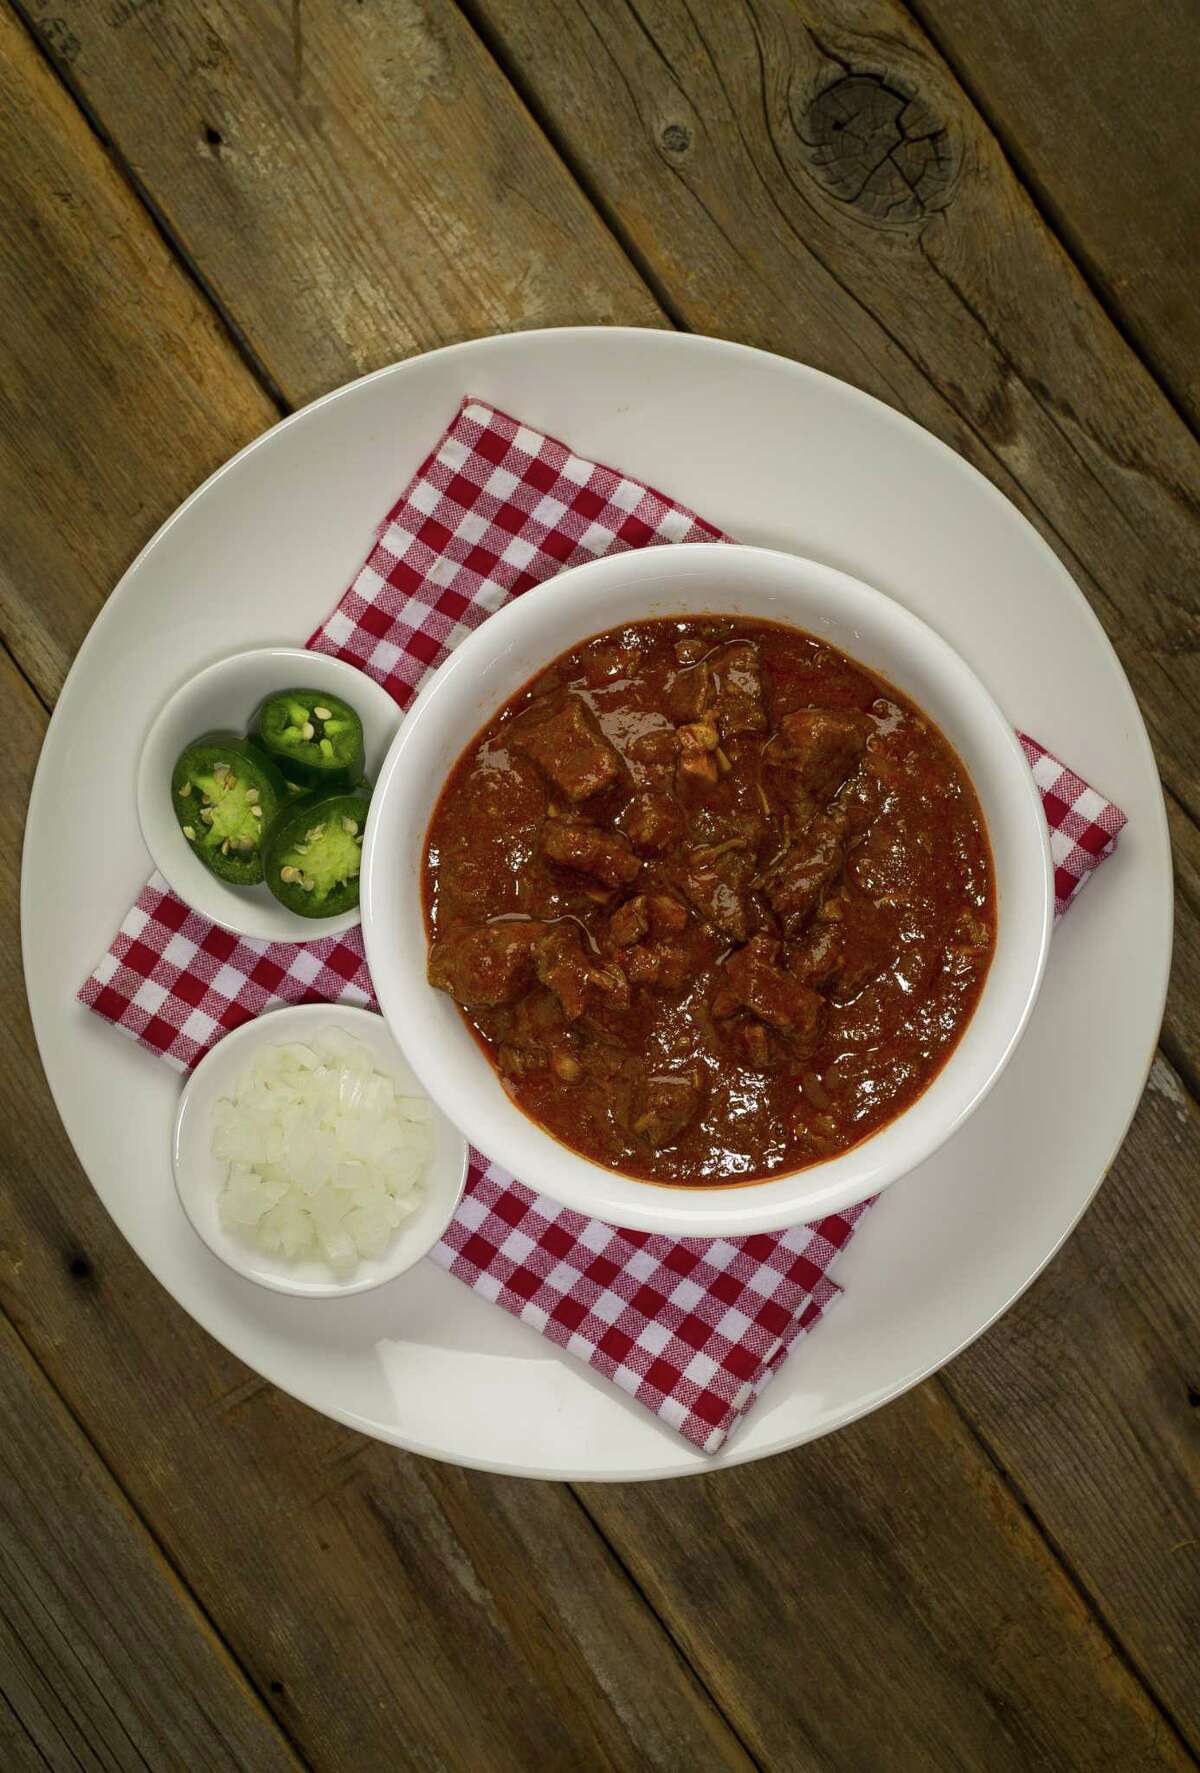 Chili Queen Chili: Recipe adapted from "The Chili Cookbook” by Robb Walsh. It’s made with diced beef chuck and pork shoulder simmered in a dried chile paste.